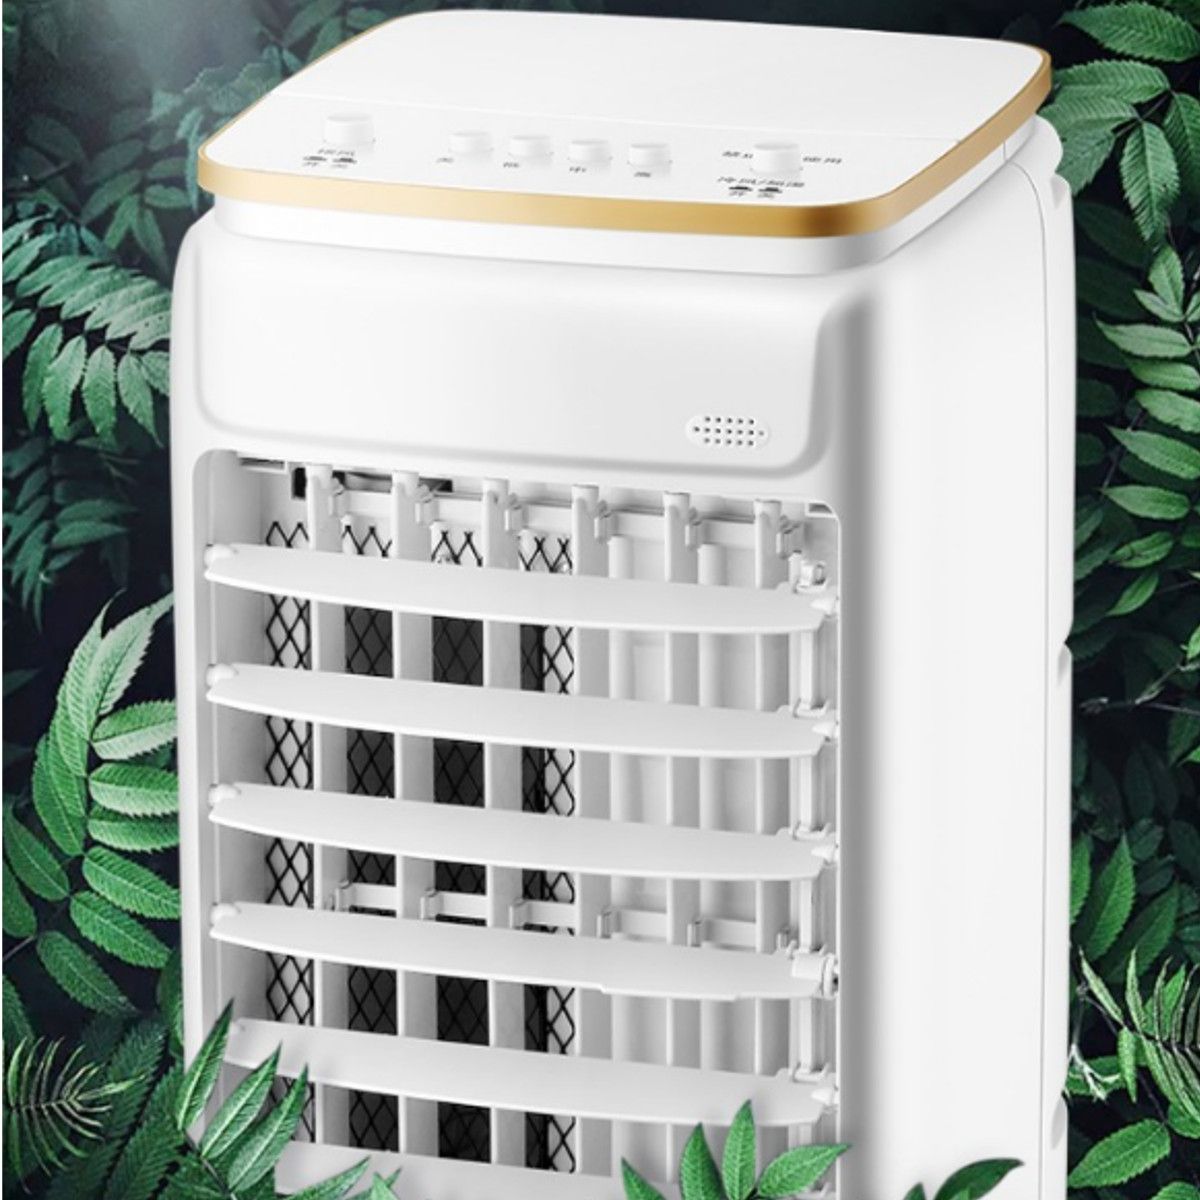 3-Gear-Portable-Movable-Air-Conditioning-Cooler-Fan-Units-Humidifier-Home-Office-1534232